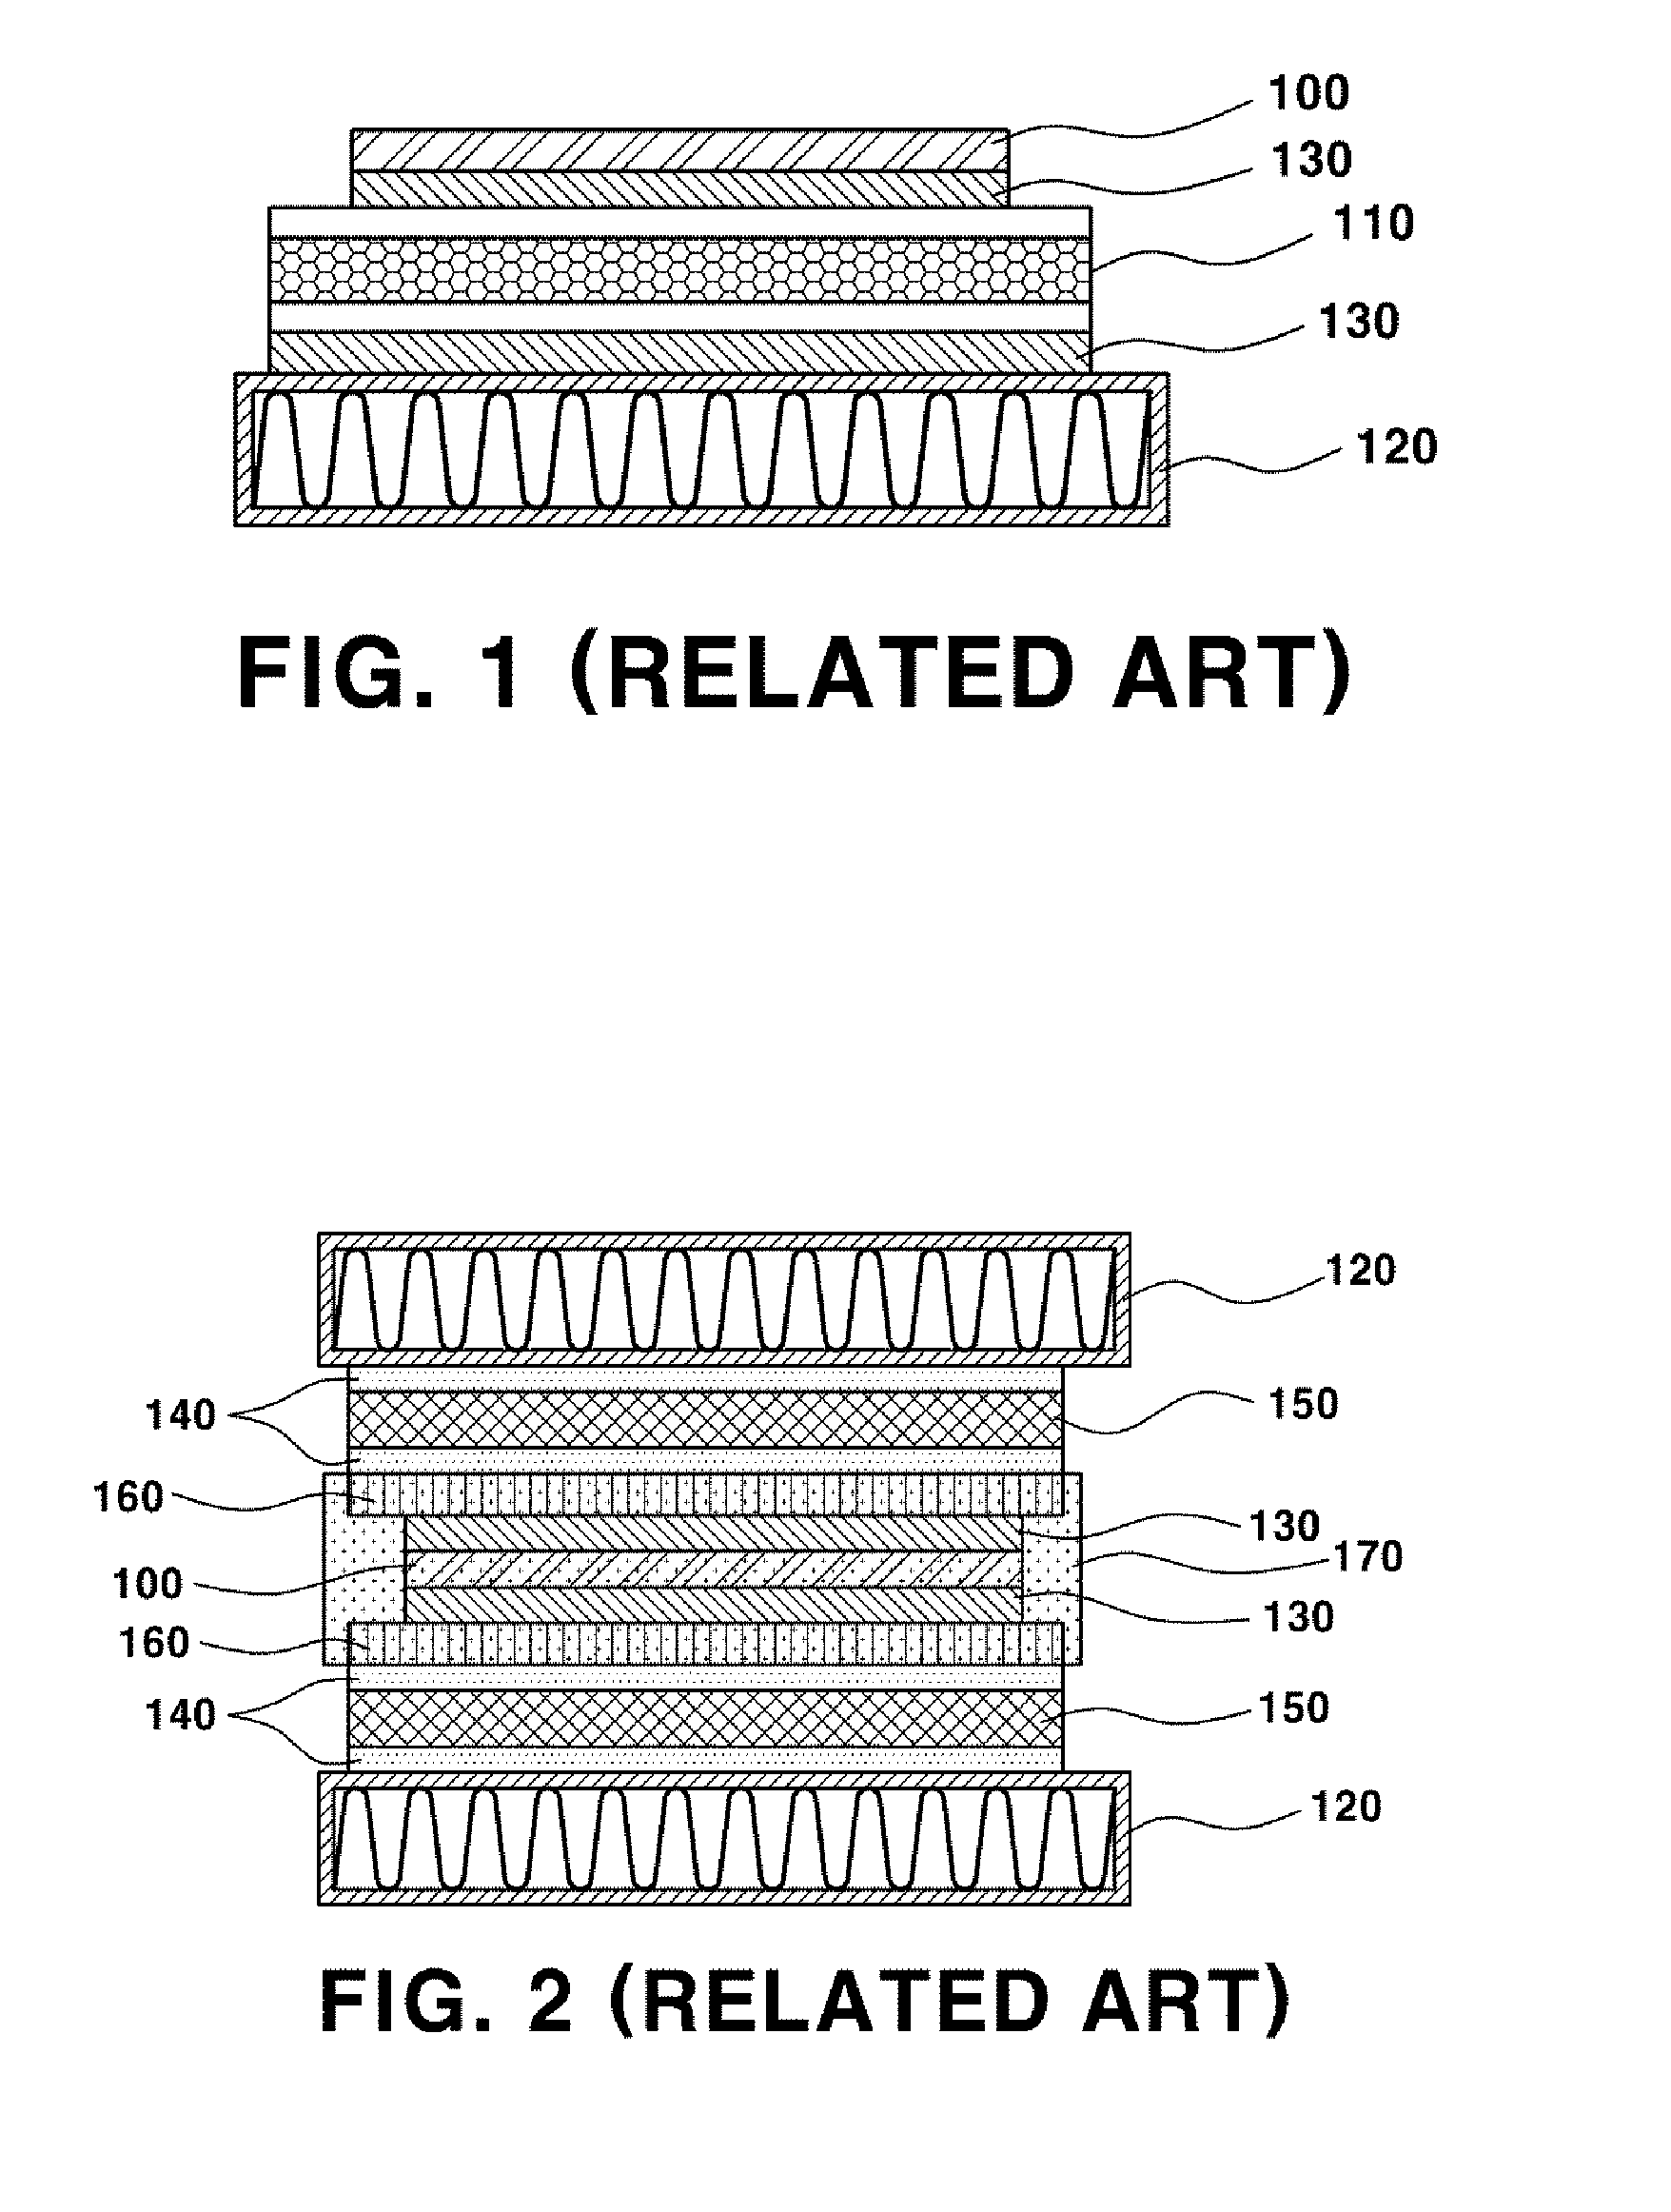 Heat sink-integrated double-sided cooled power module